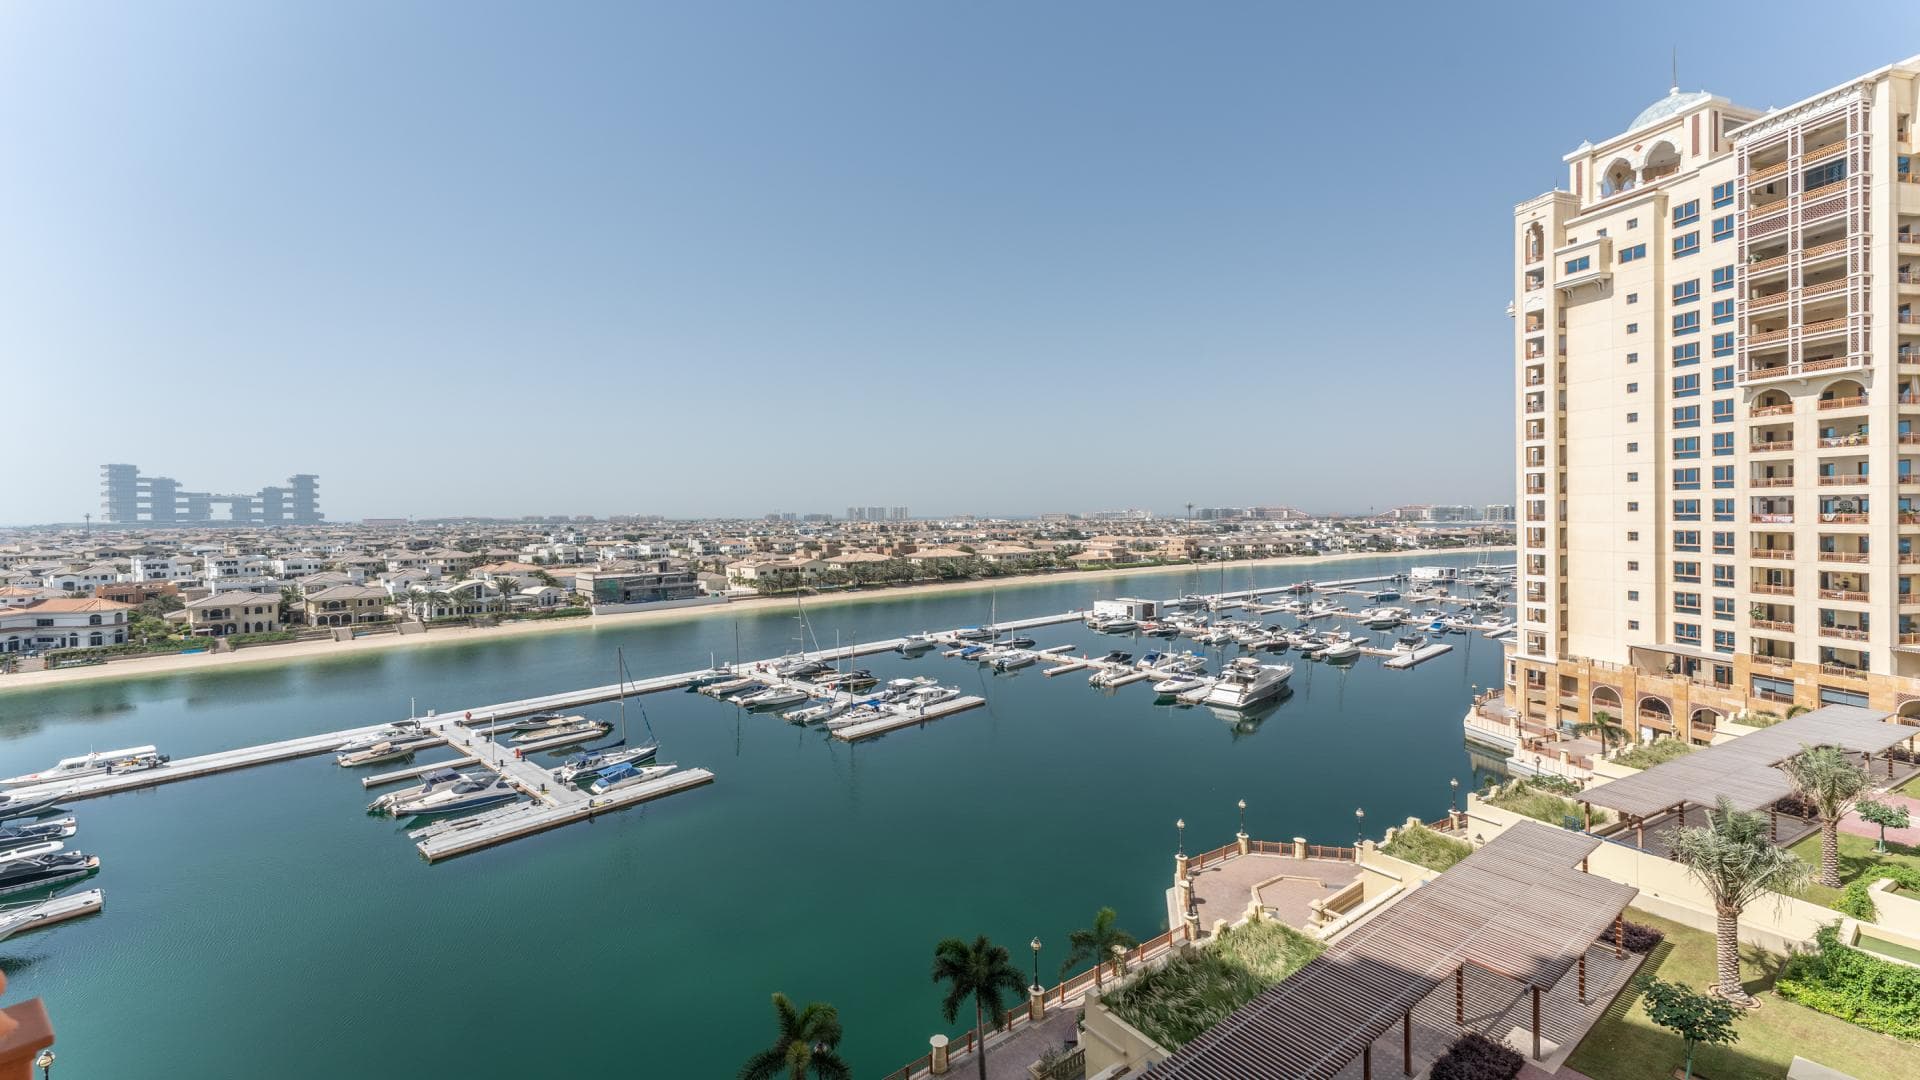 2 Bedroom Apartment For Rent Marina Residences Lp32693 301336e6bed73800.jpg